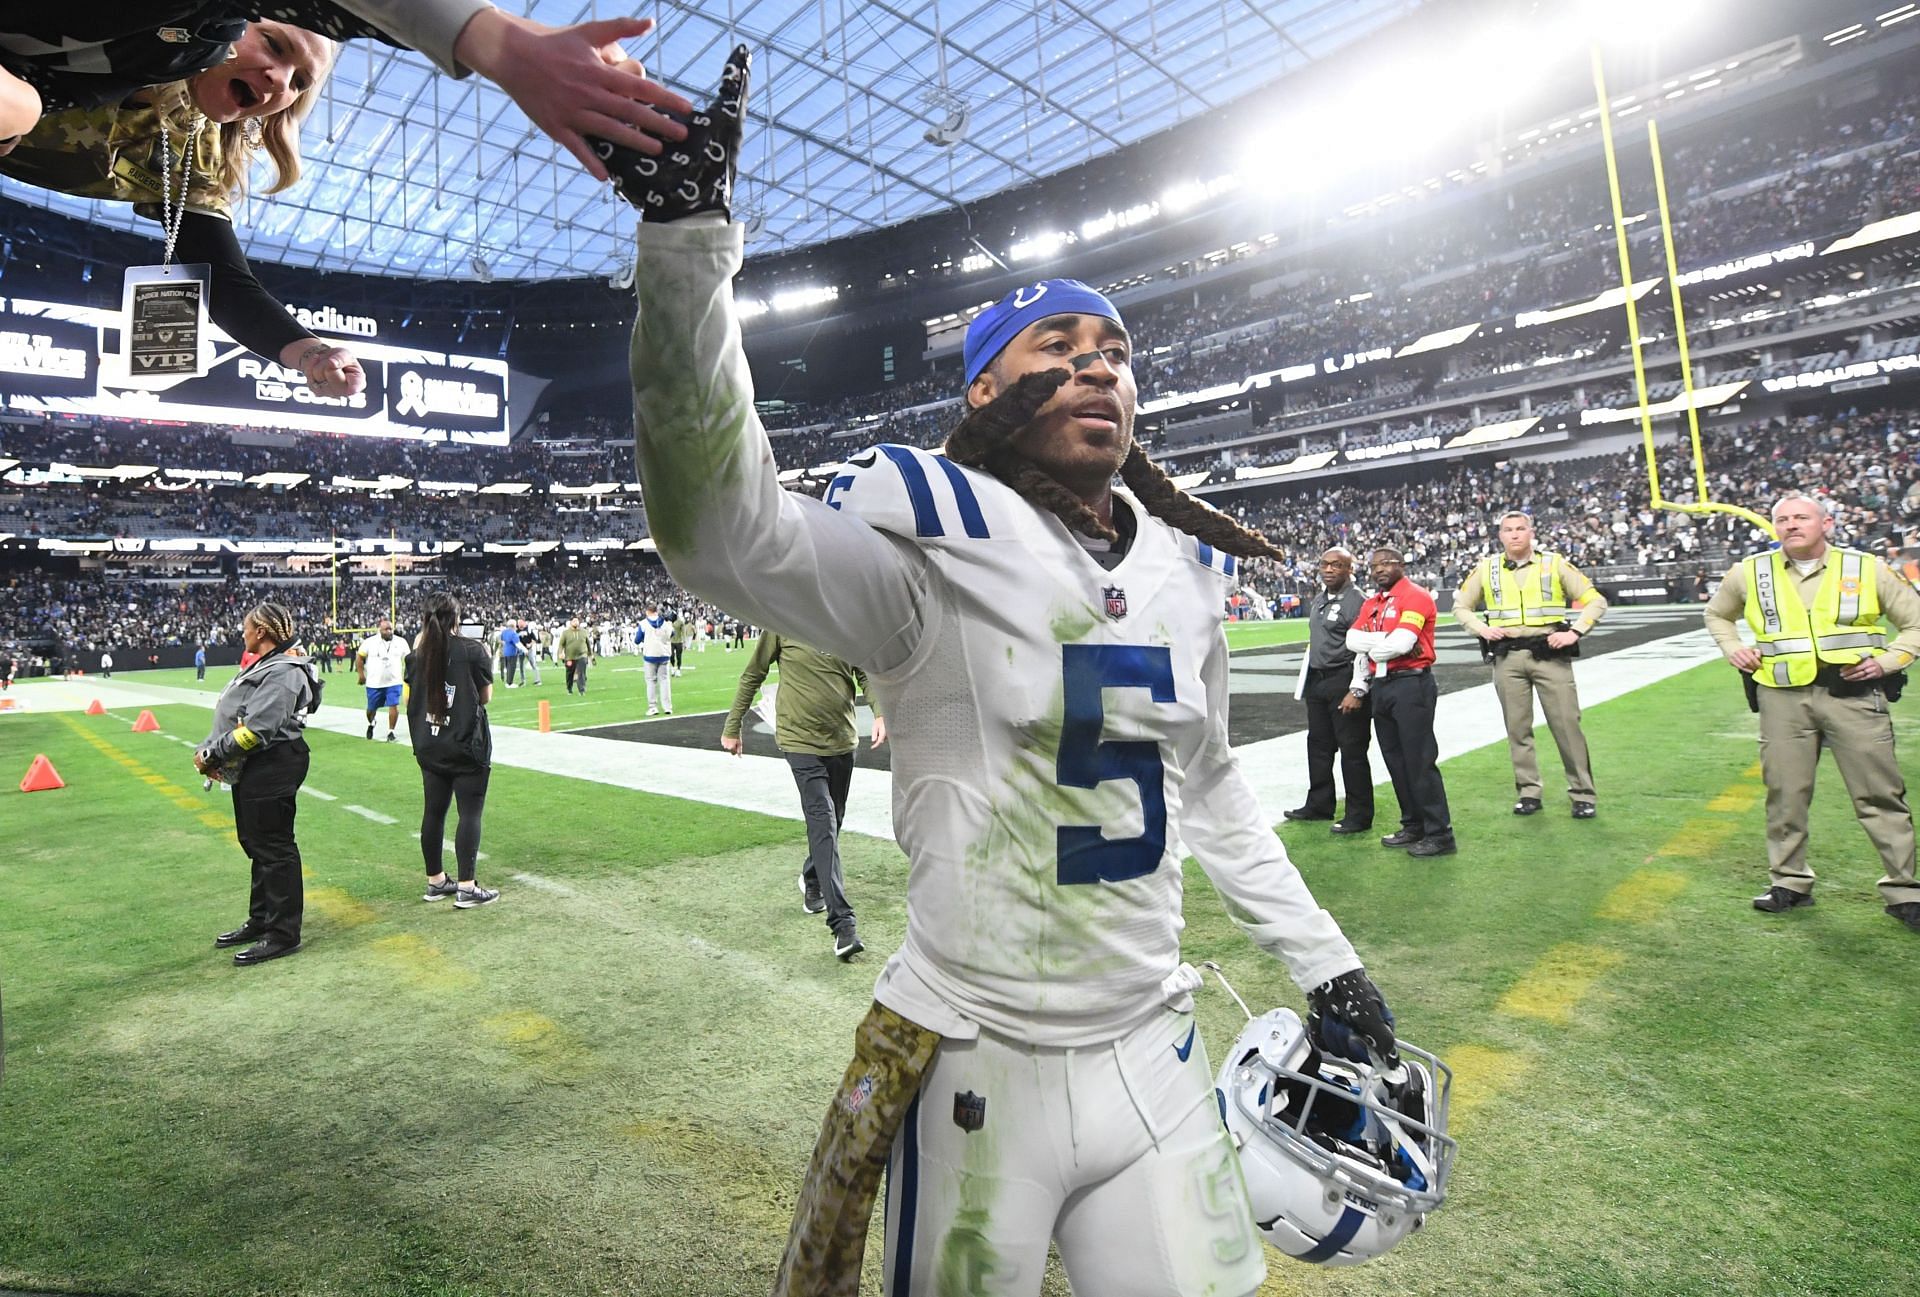 Stephon Gilmore of the Indianapolis Colts walks off the field after a win